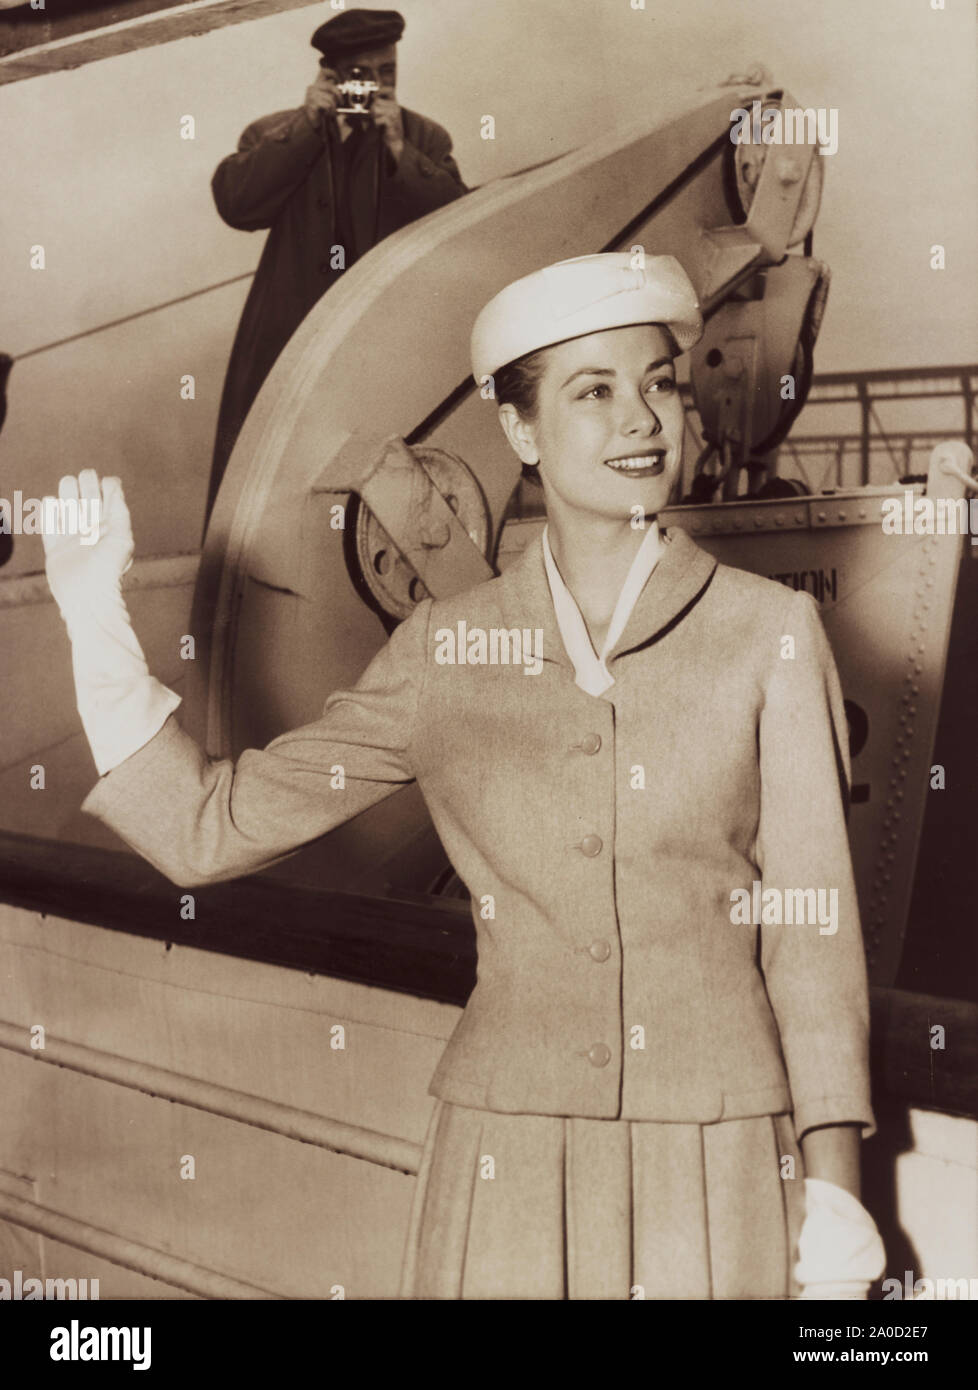 Movie star Grace Kelly waves goodbye to New York as she prepares to board the ocean liner Constitution to sail to Monaco where she will wed Prince Rainier of Monaco. Princess Grace died at Monaco Hospital on September 14, 1982, succumbing to injuries sustained in a traffic collision the day before. At the time of her death, she was 52 years old. Stock Photo